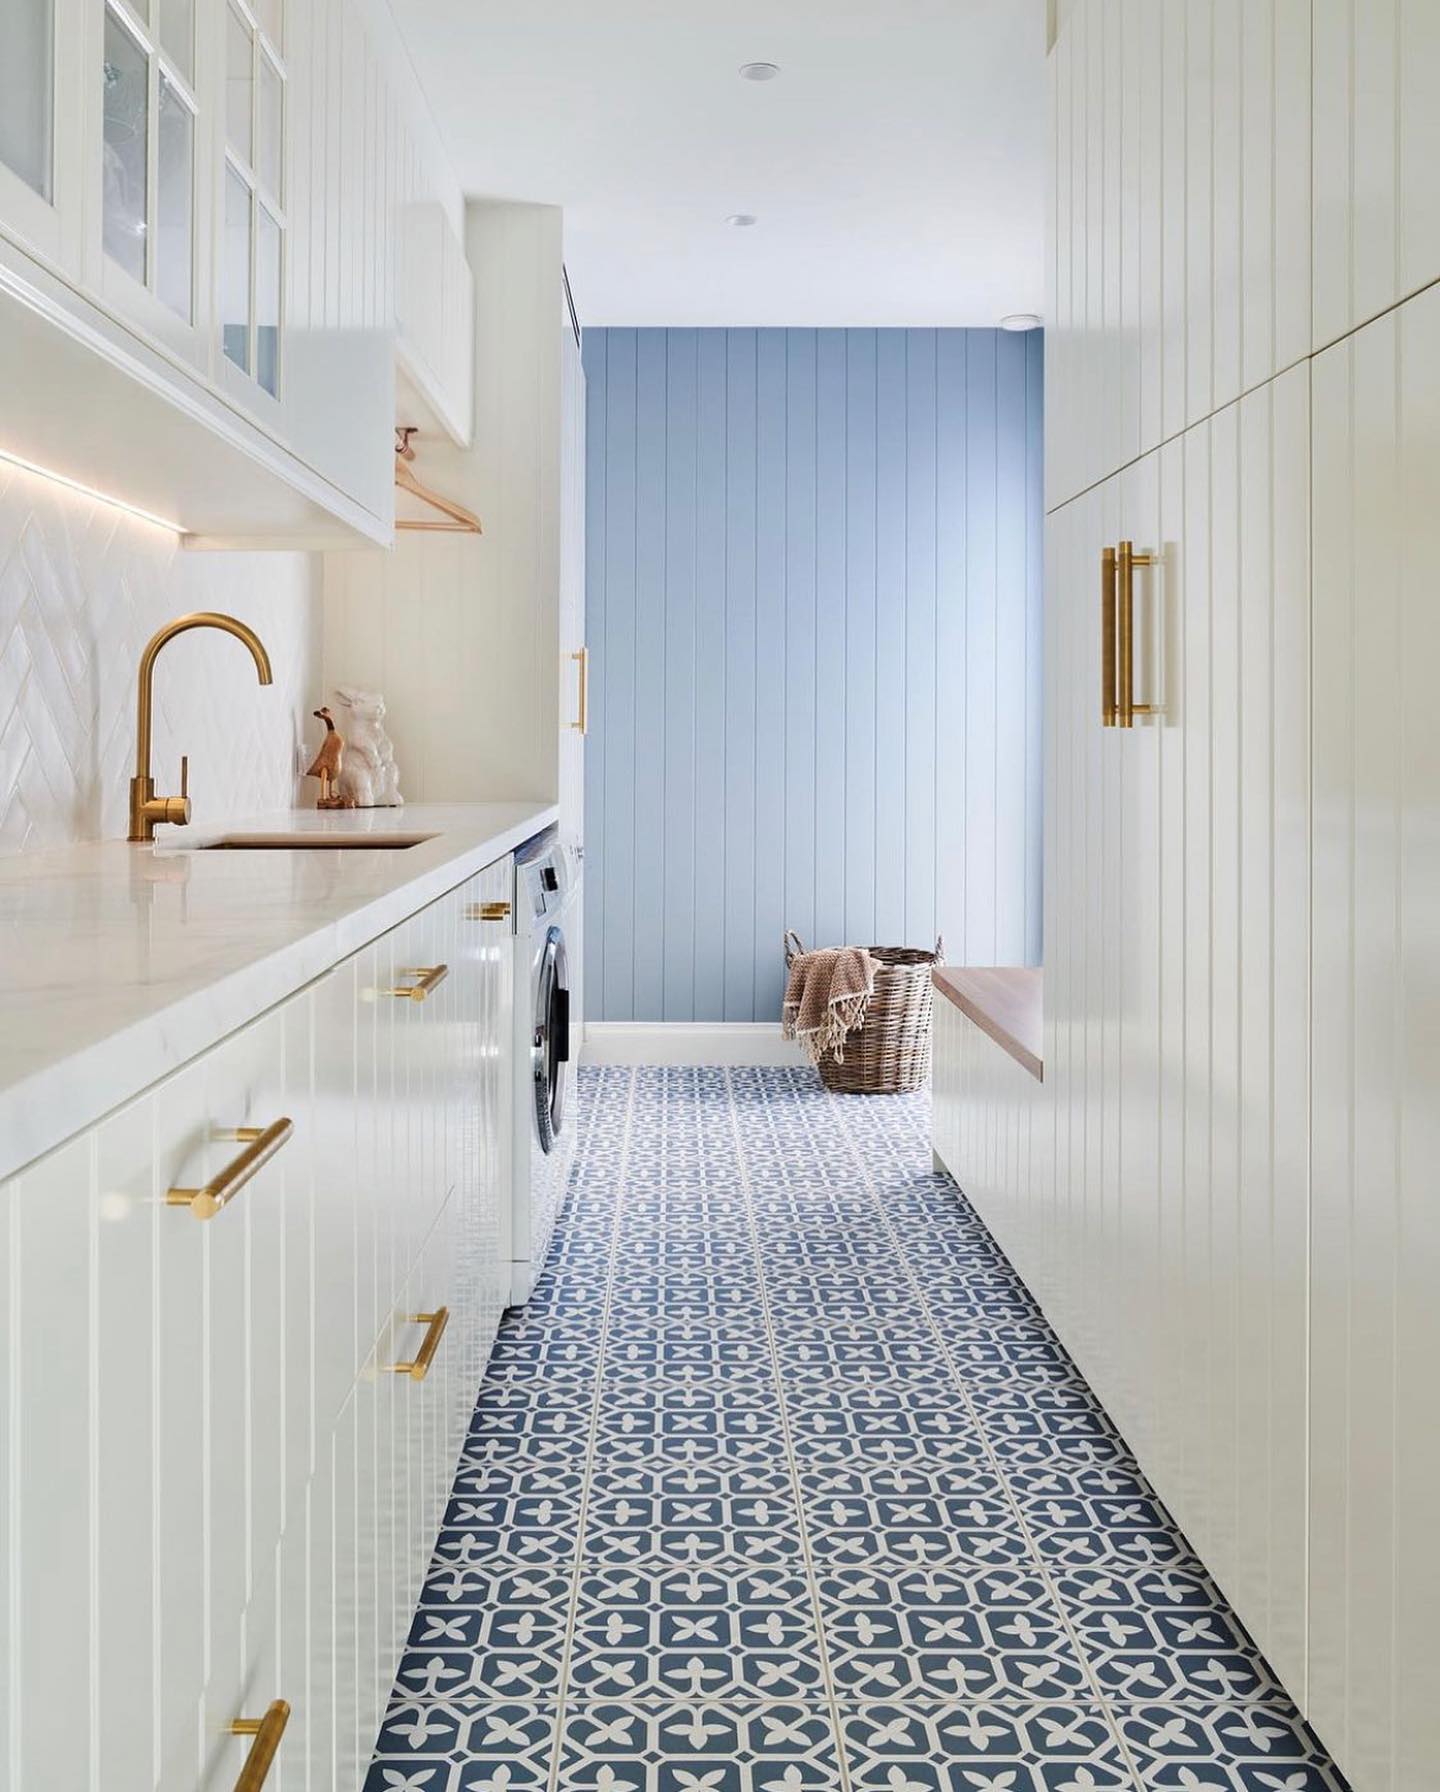 11 Laundry Tile Ideas to Level Up Your Space